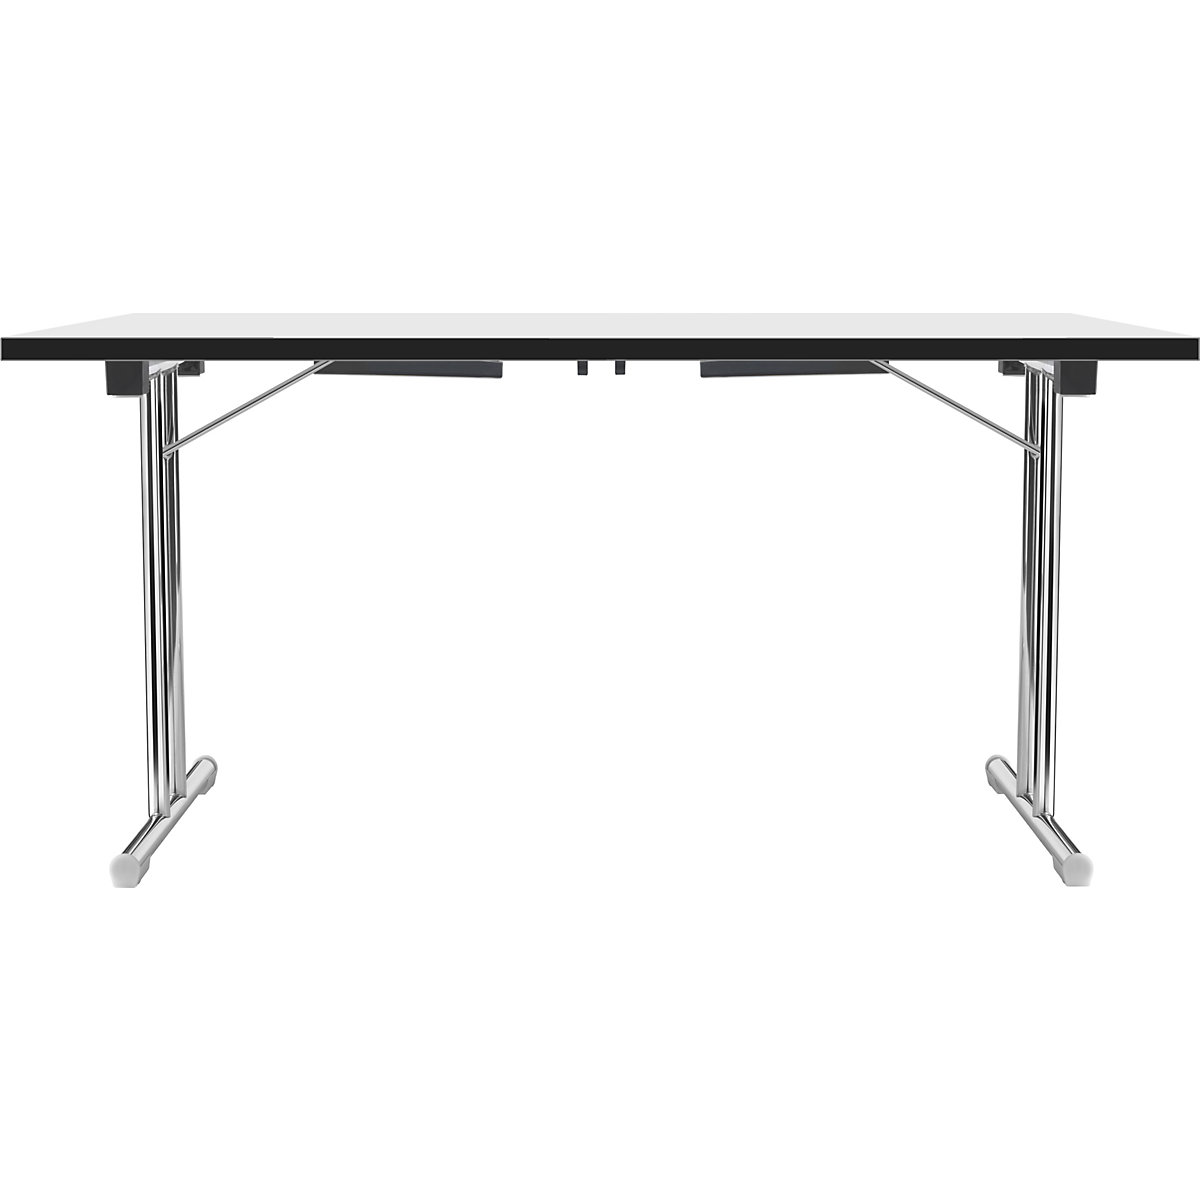 Folding table with double T base, tubular steel frame, chrome plated, white/black, WxD 1200 x 600 mm-8